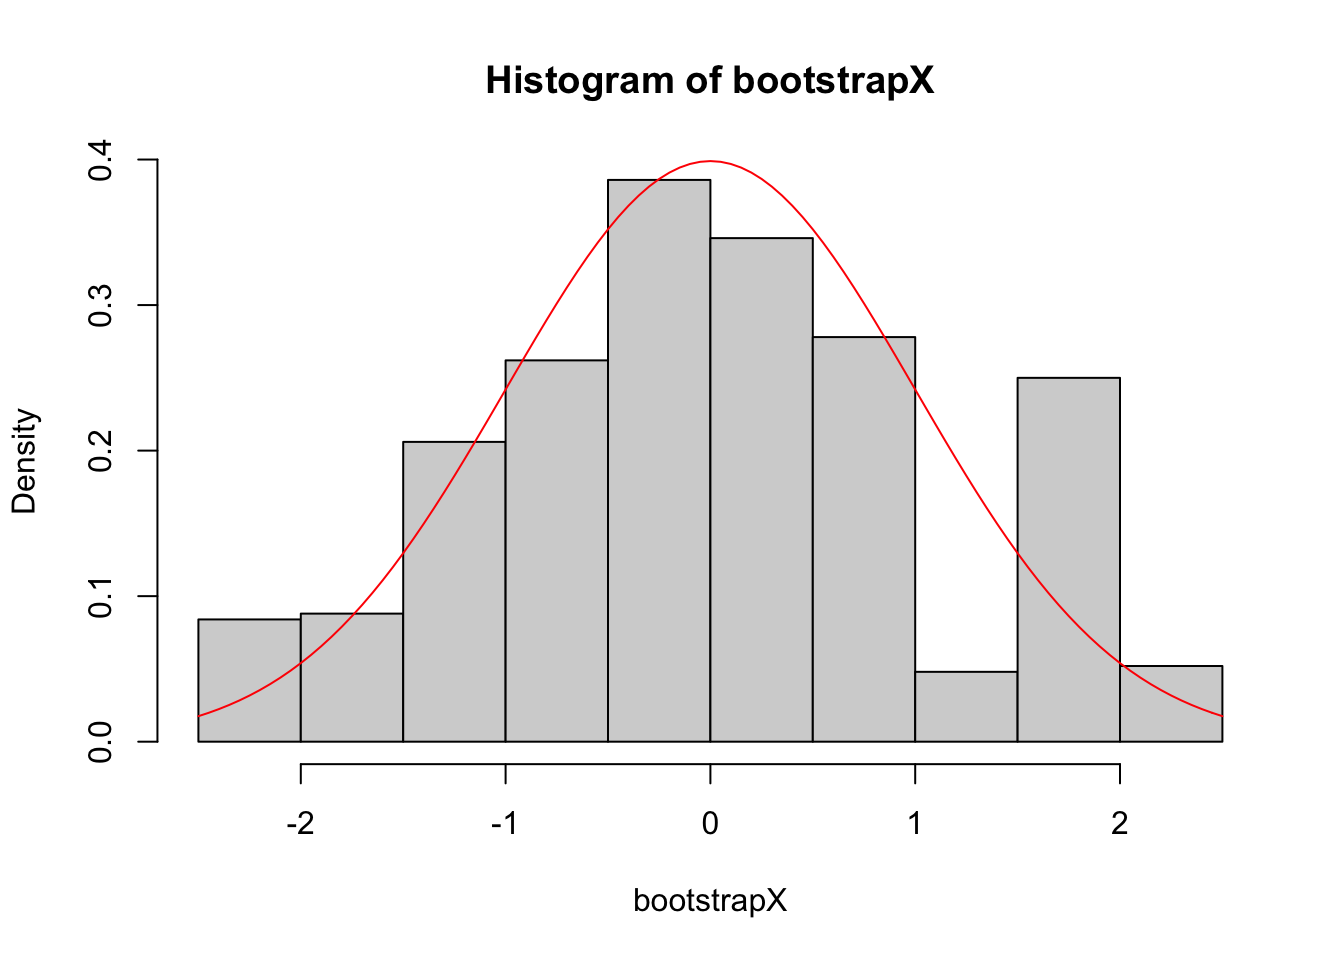 Given a sample of 50 independent draws from a standard normal, we sample with replacement 1000 times. This sample is represented by the histogram, and the true density function of the standard normal is shown in red.